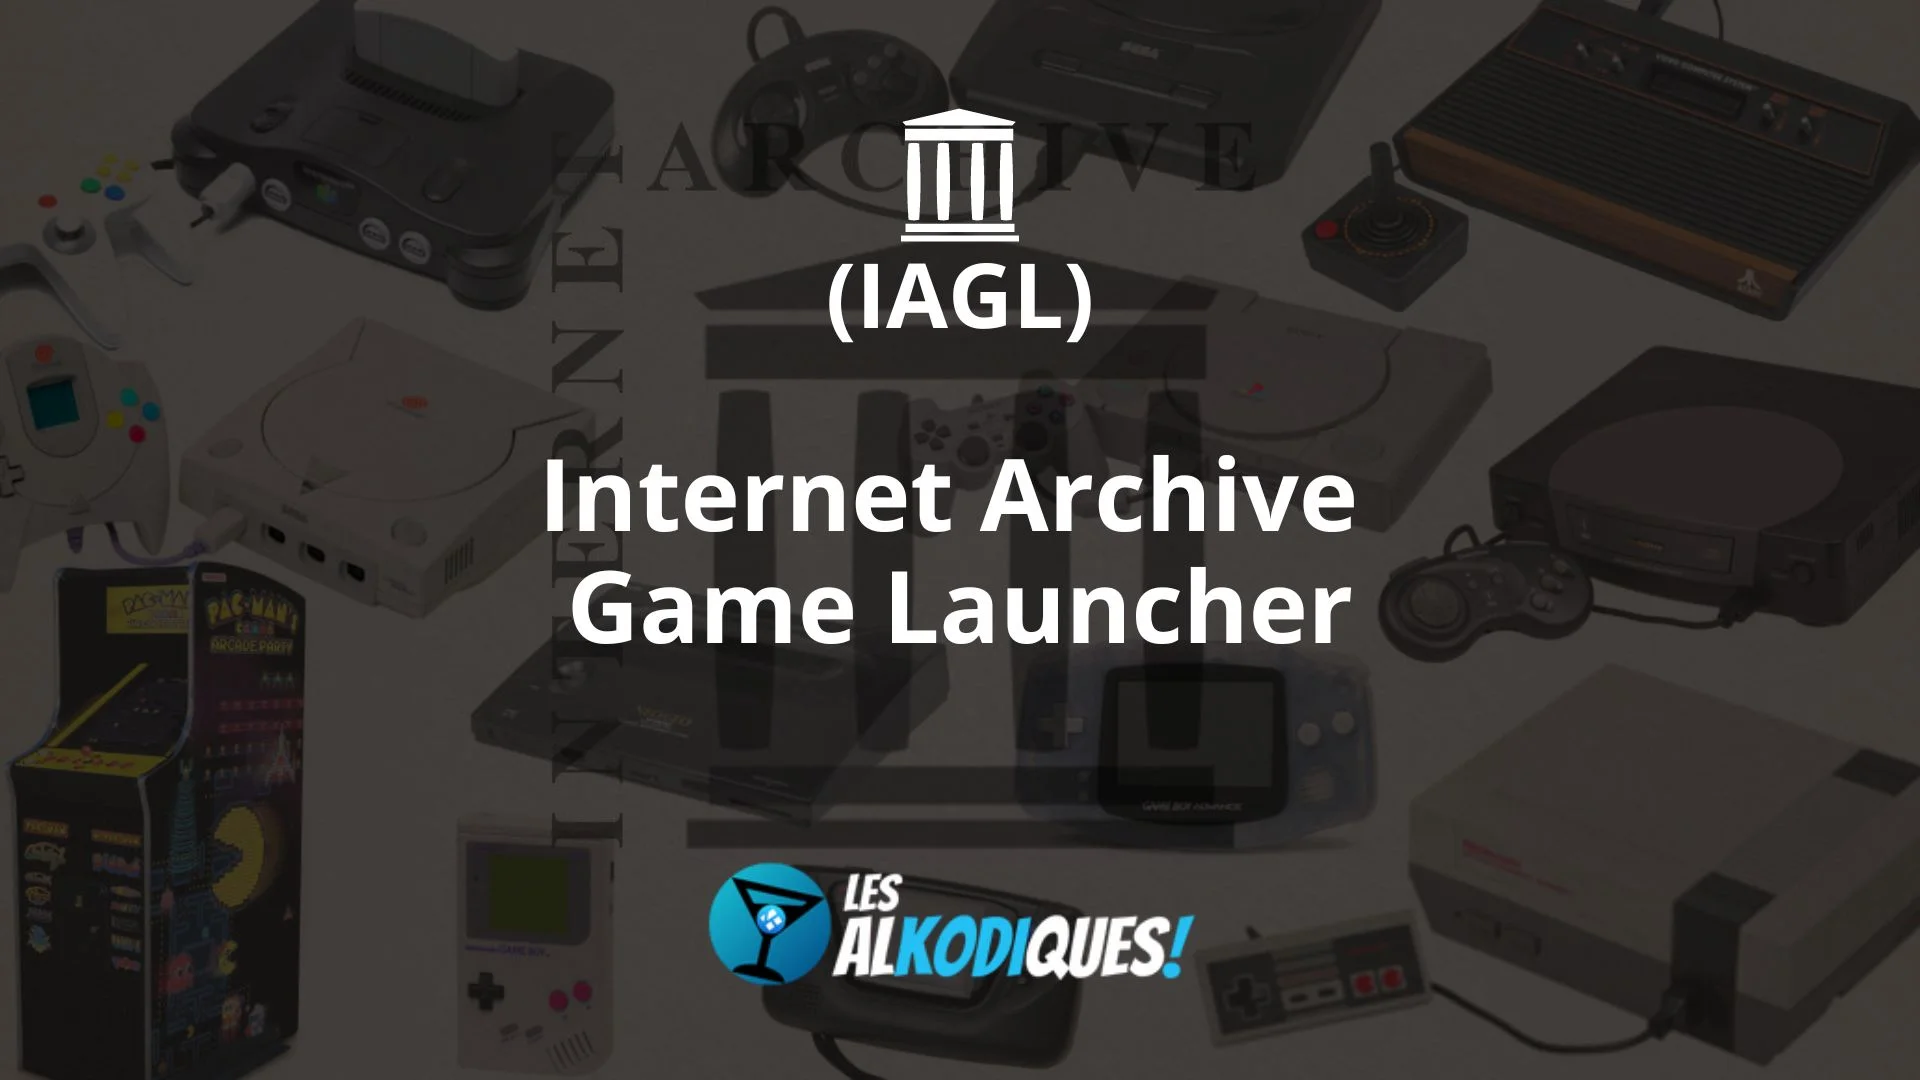 IAGL Internet Archive Game Launcher